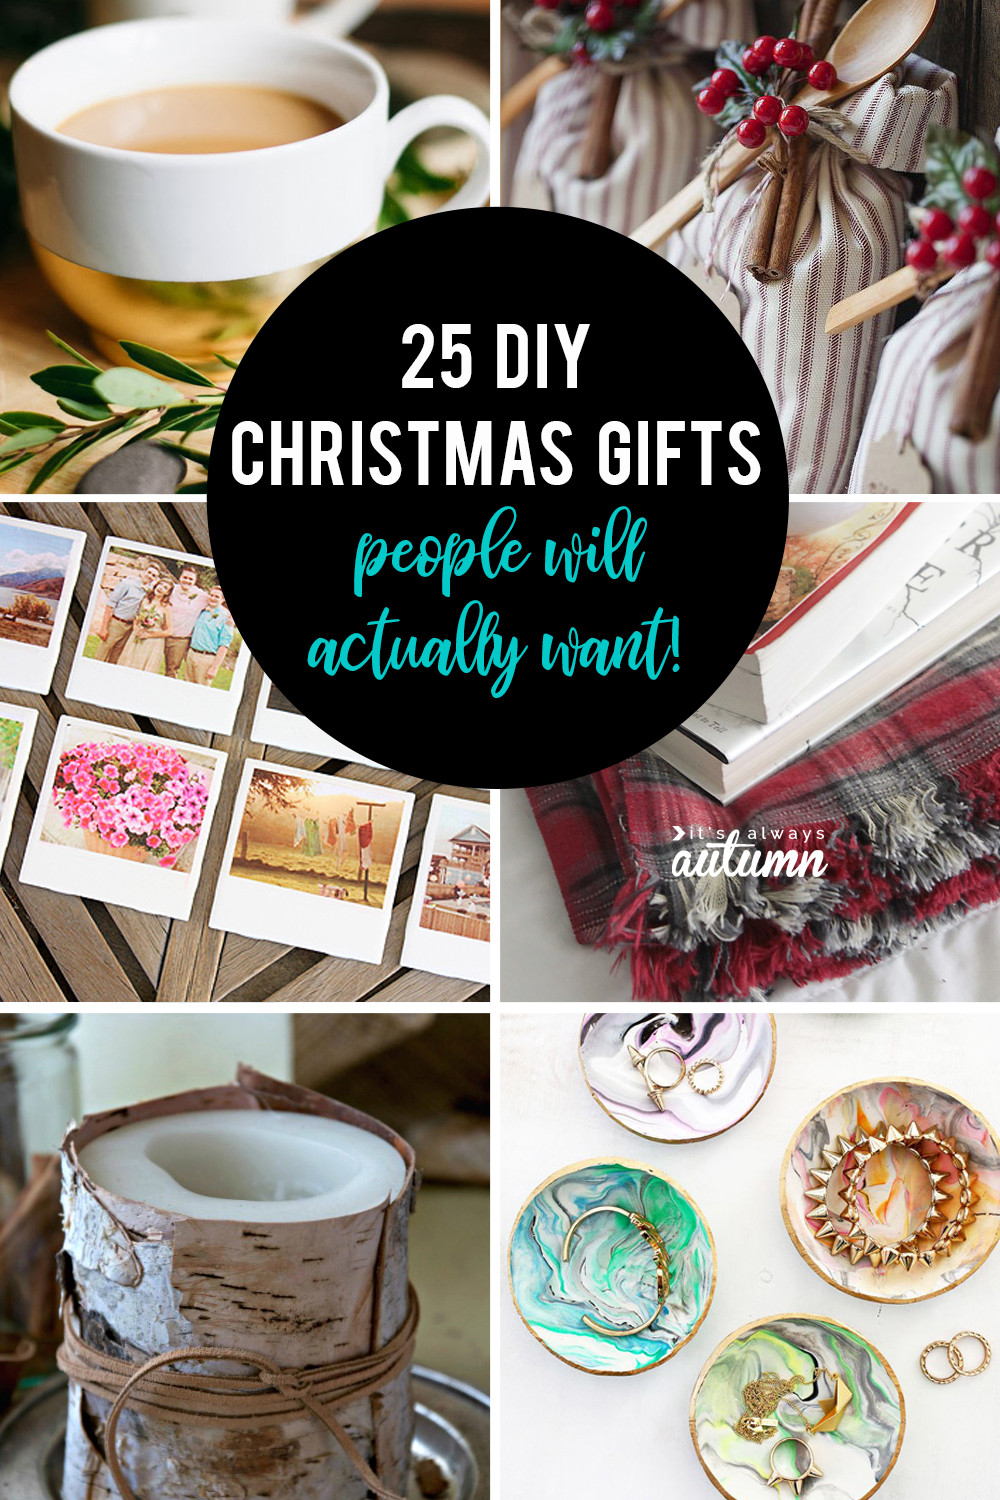 Easy DIY Christmas Gifts
 25 amazing DIY ts people will actually want It s